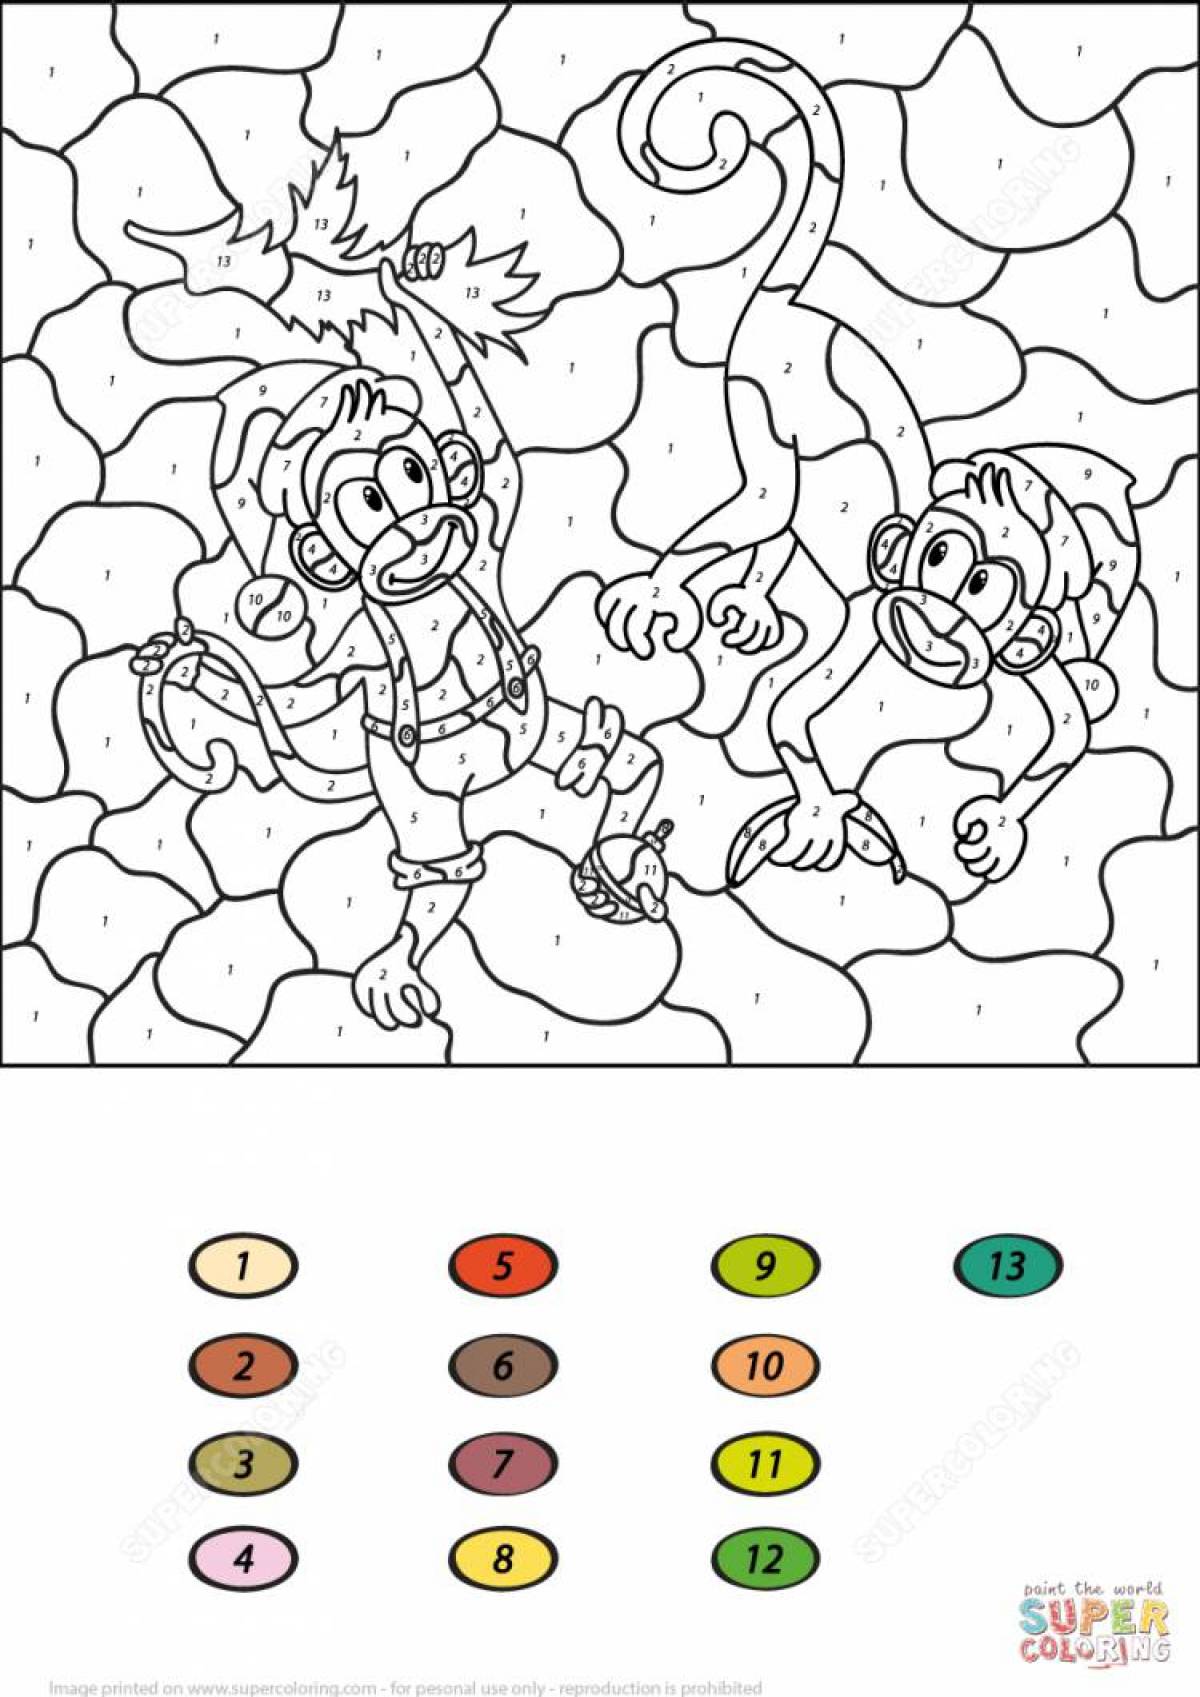 Playful offline coloring by numbers